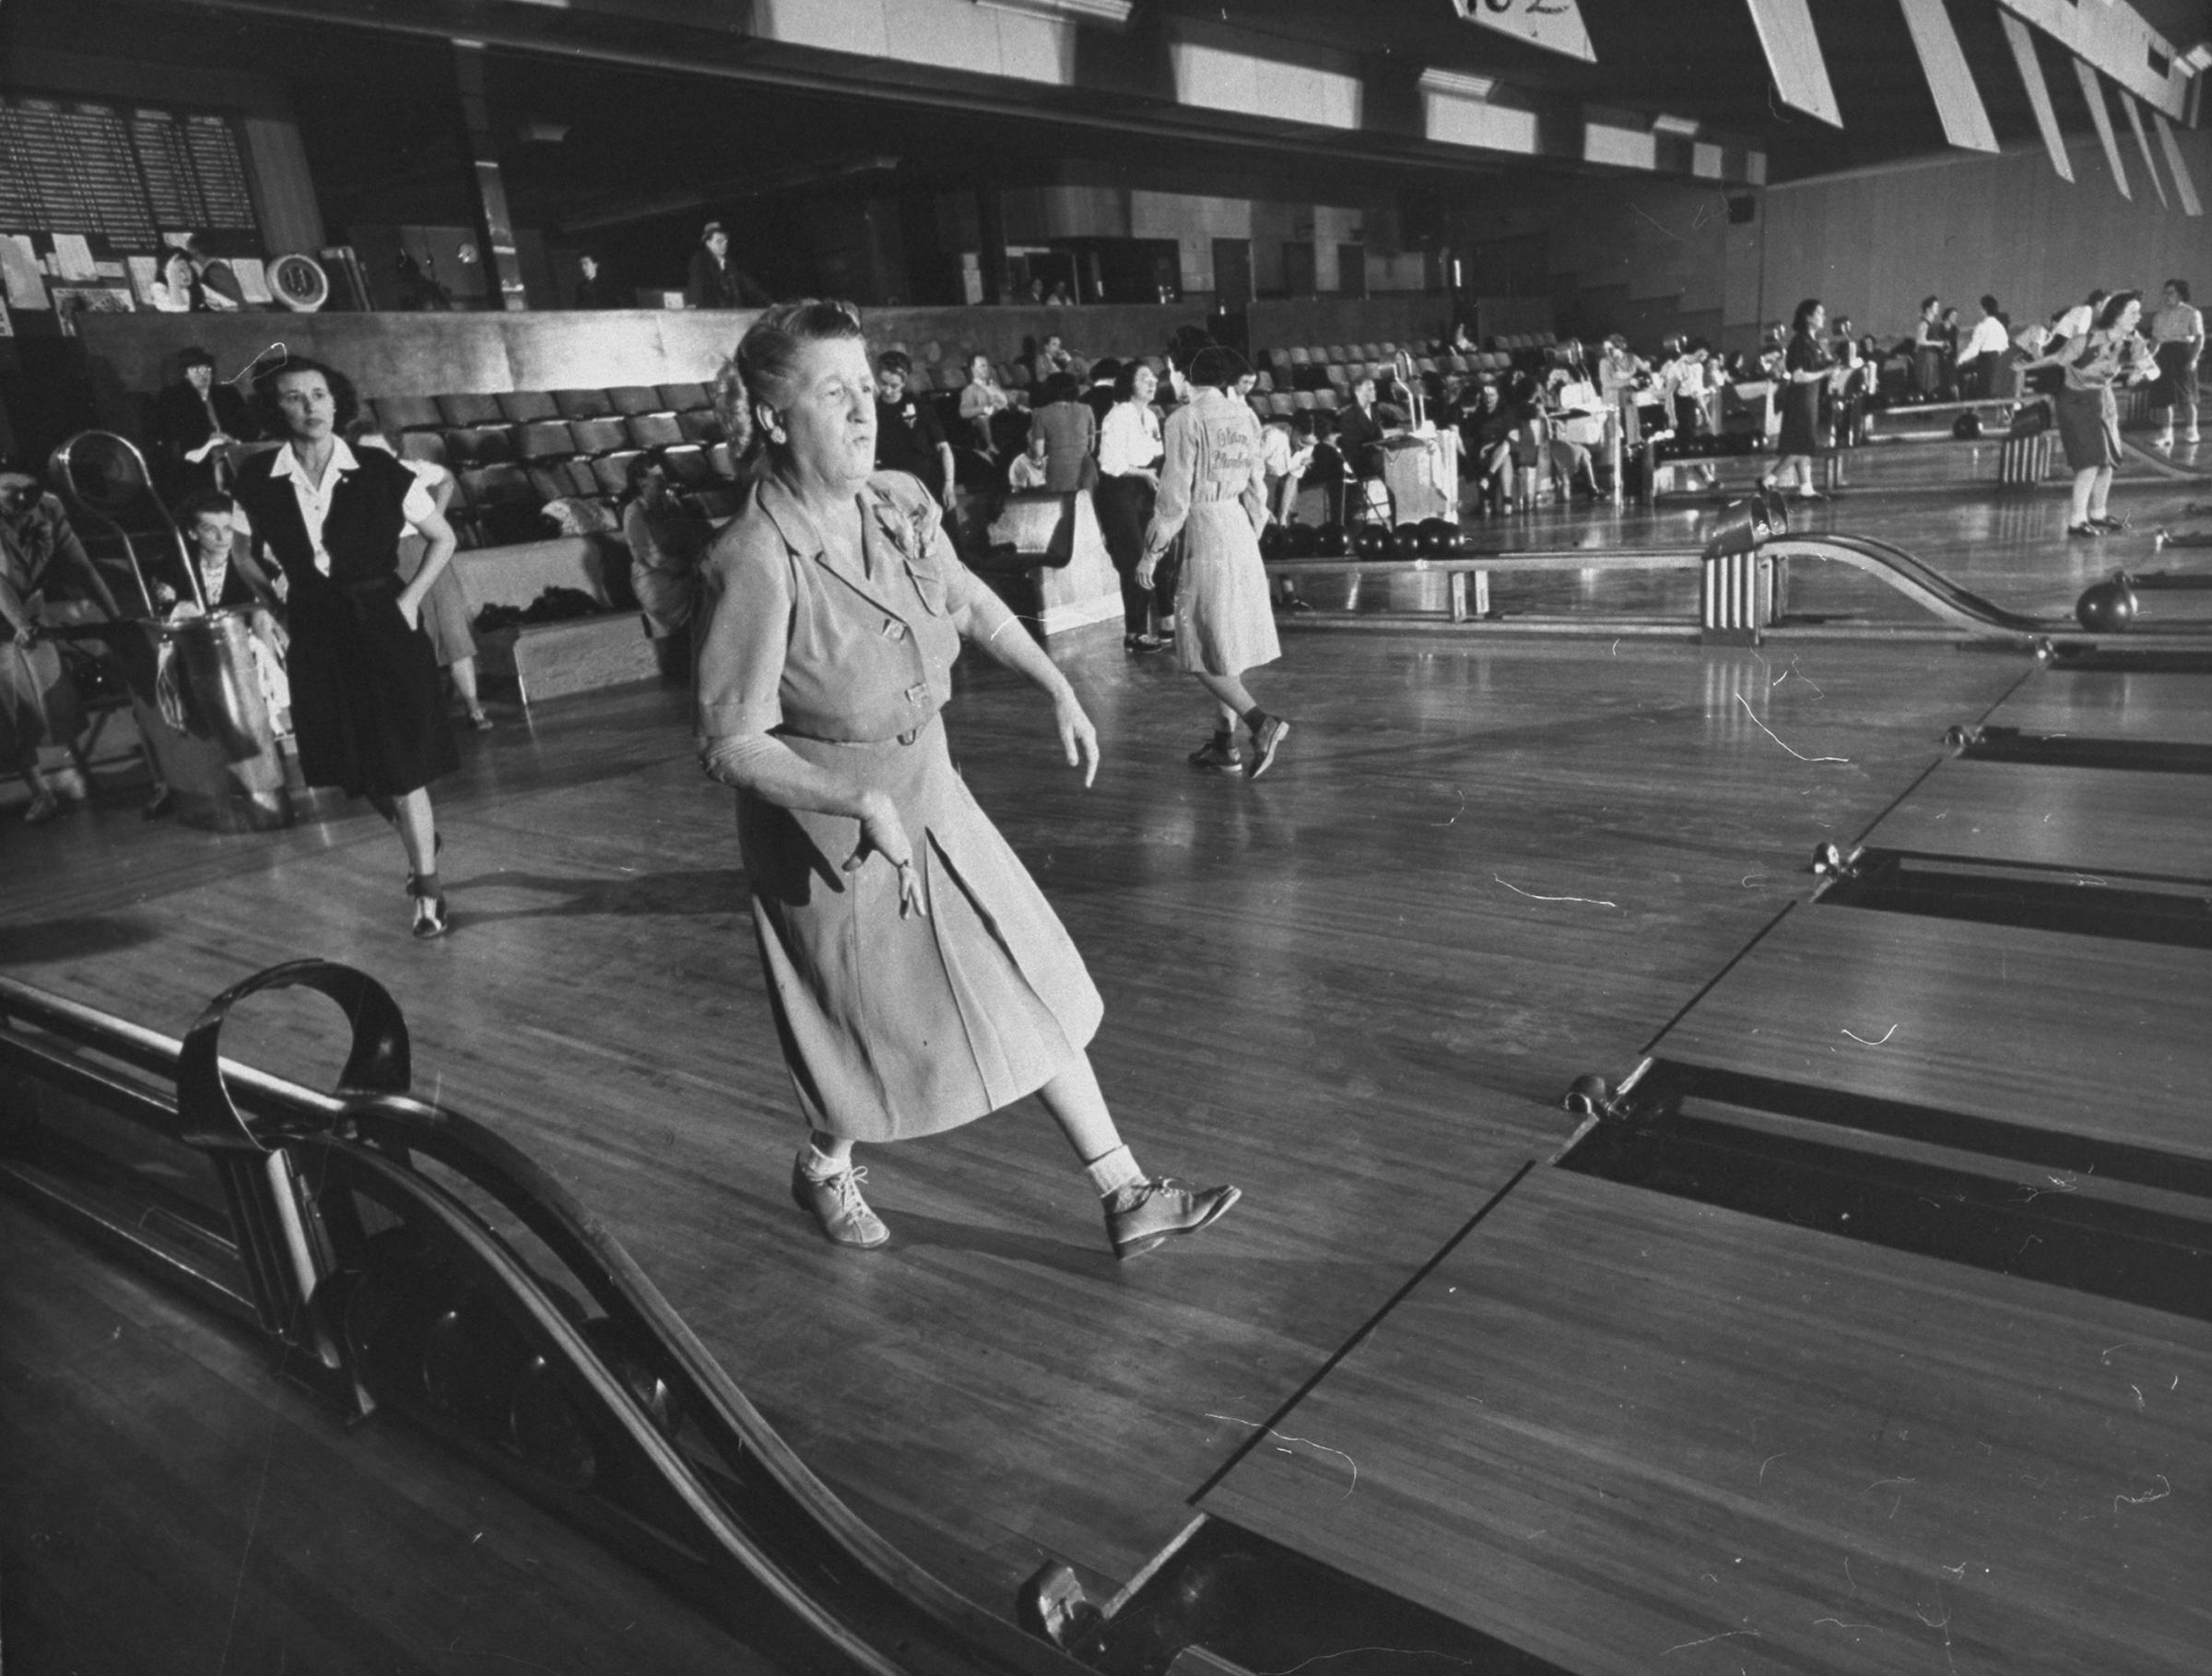 Florence Wilson and other women at a bowling alley in Teaneck, New Jersey, in 1947.